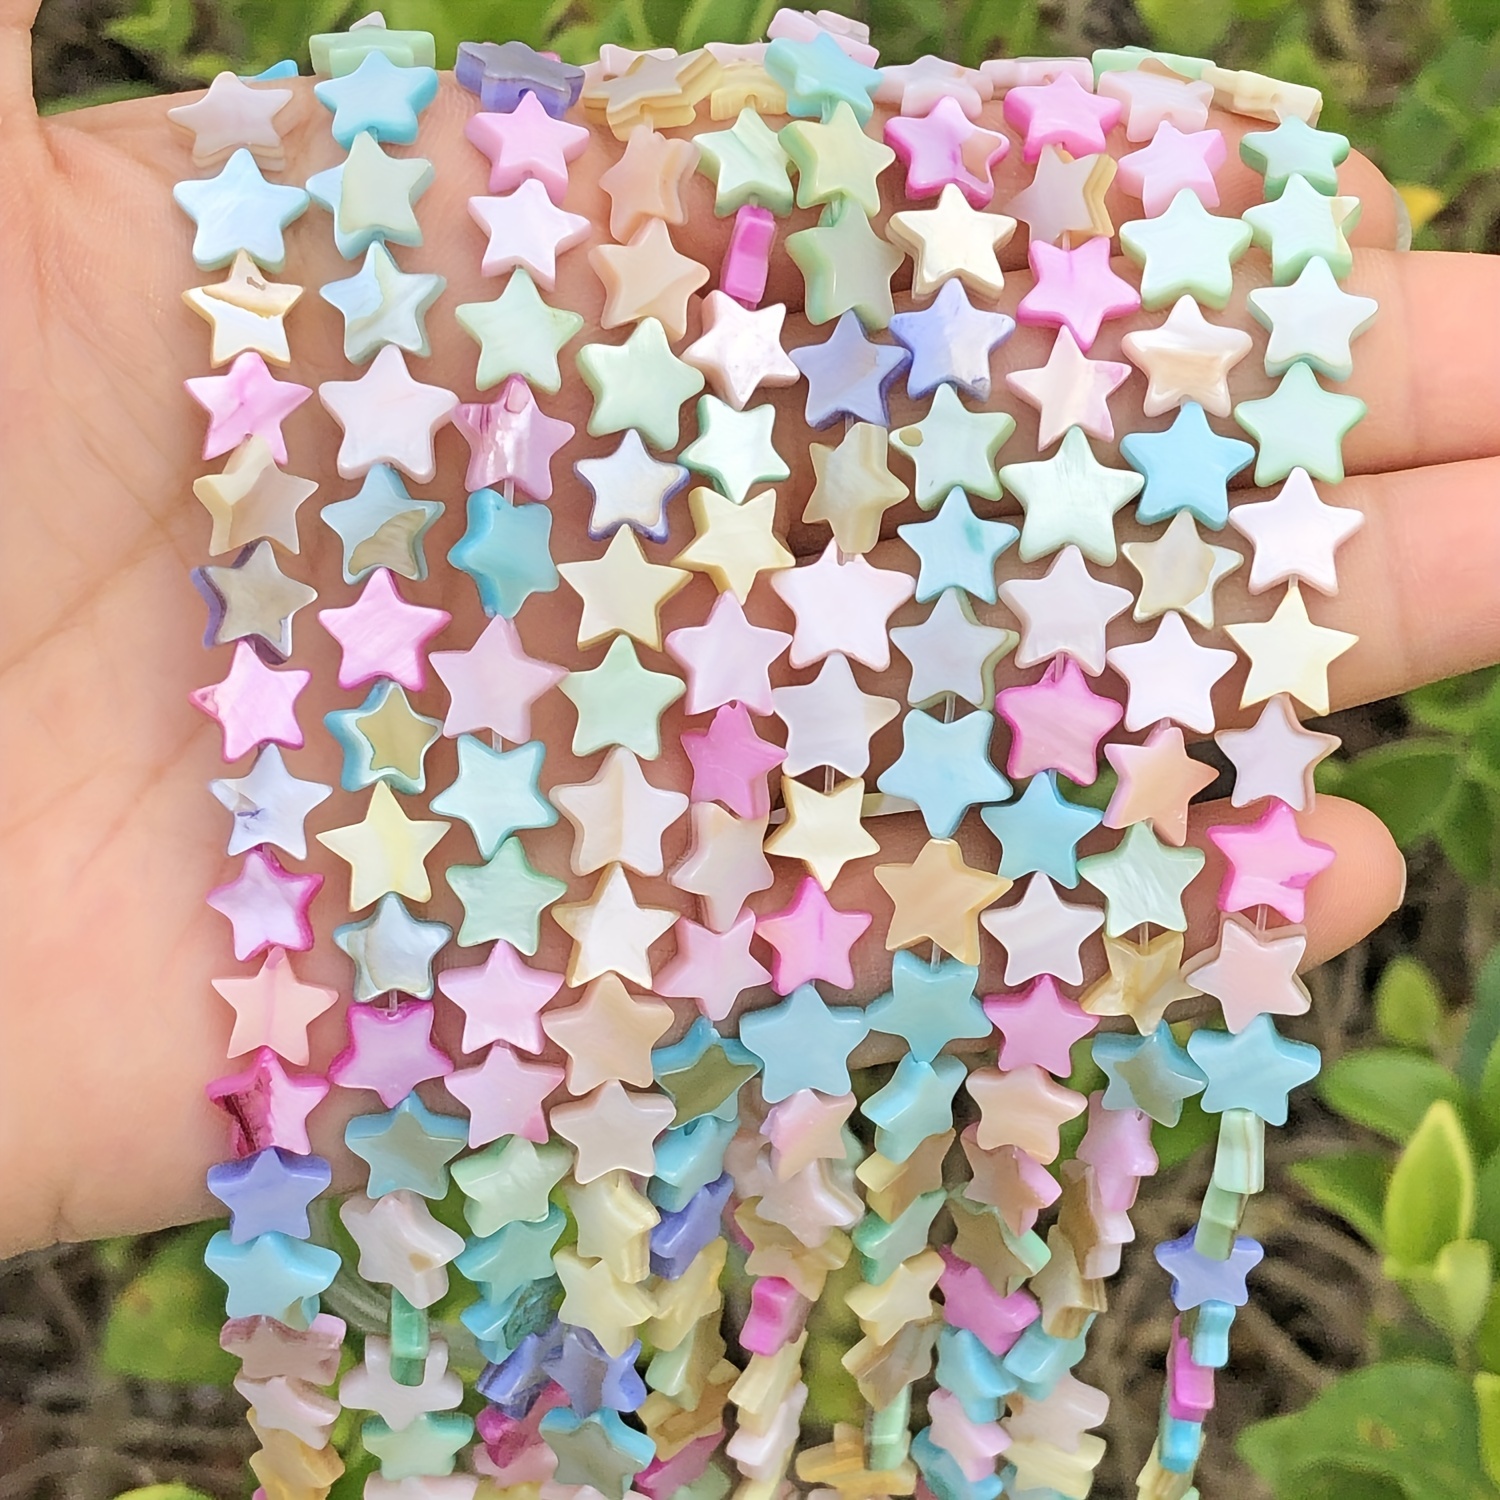 

Natural Shell Star-shaped Beads, 50 Pcs Pastel Multicolor Freshwater Pearl, Diy Bracelet & Earring Craft Bead Assortments - 8mm Macaron Hues Shell Beads For Jewelry Making